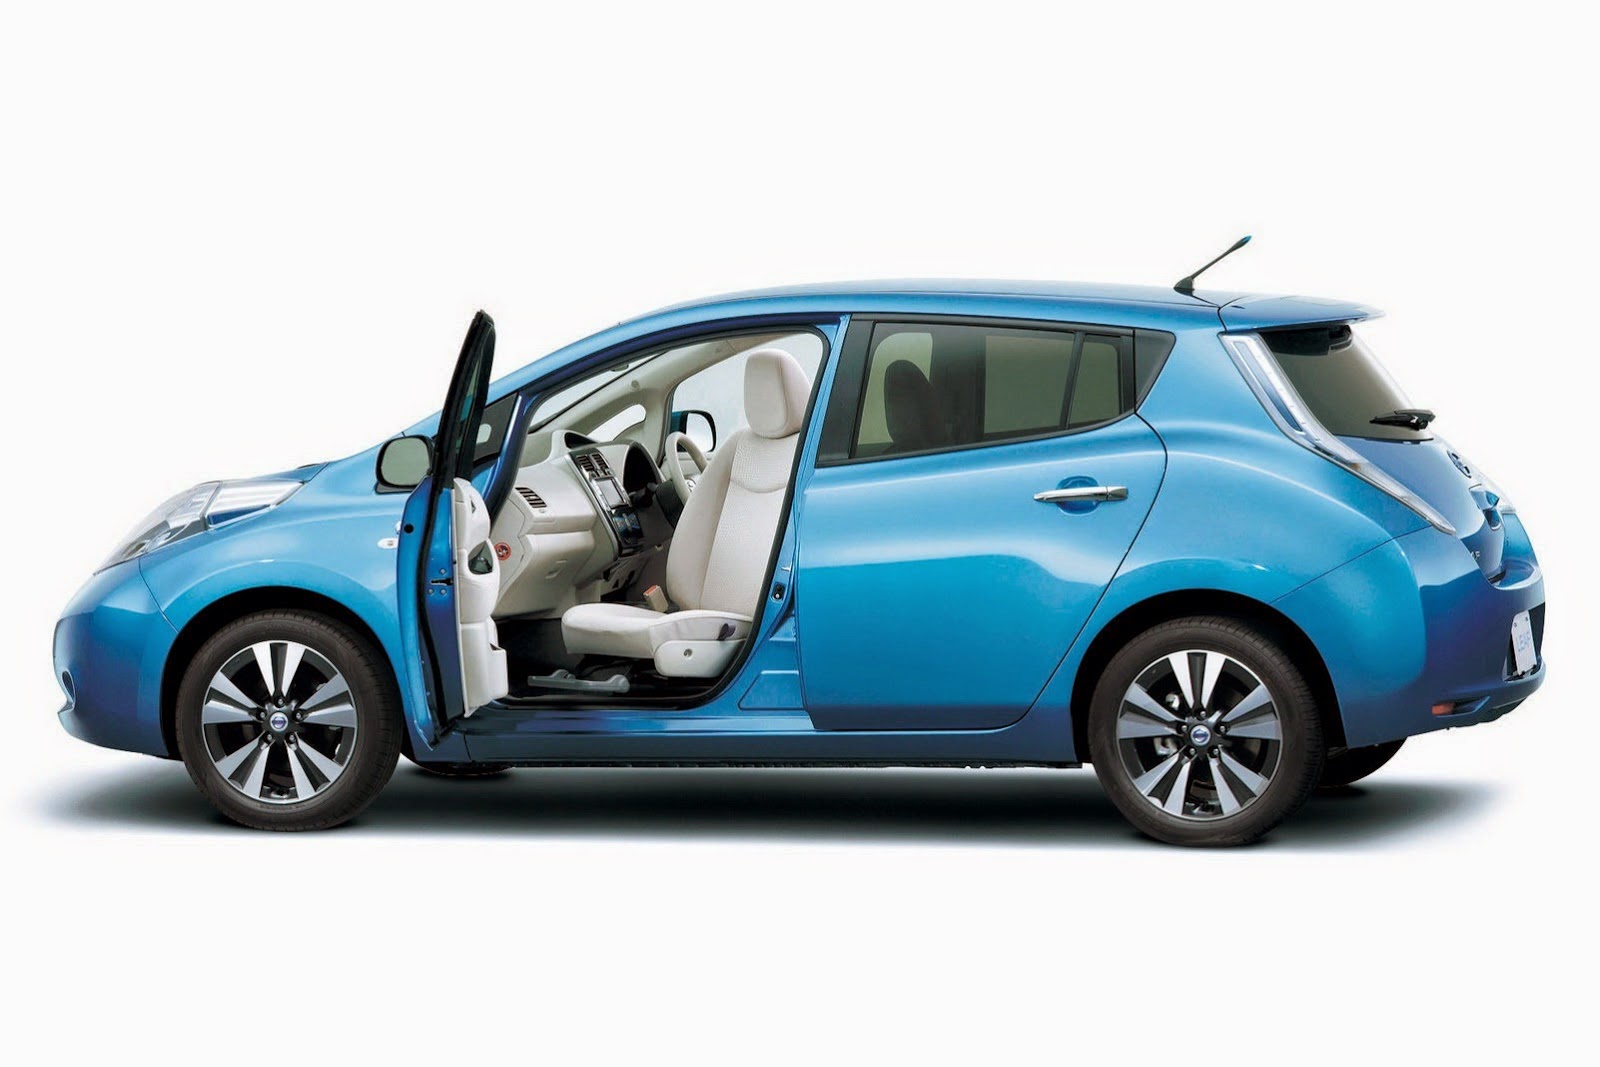 Nissan Leaf - Environmentally friendly and affordable